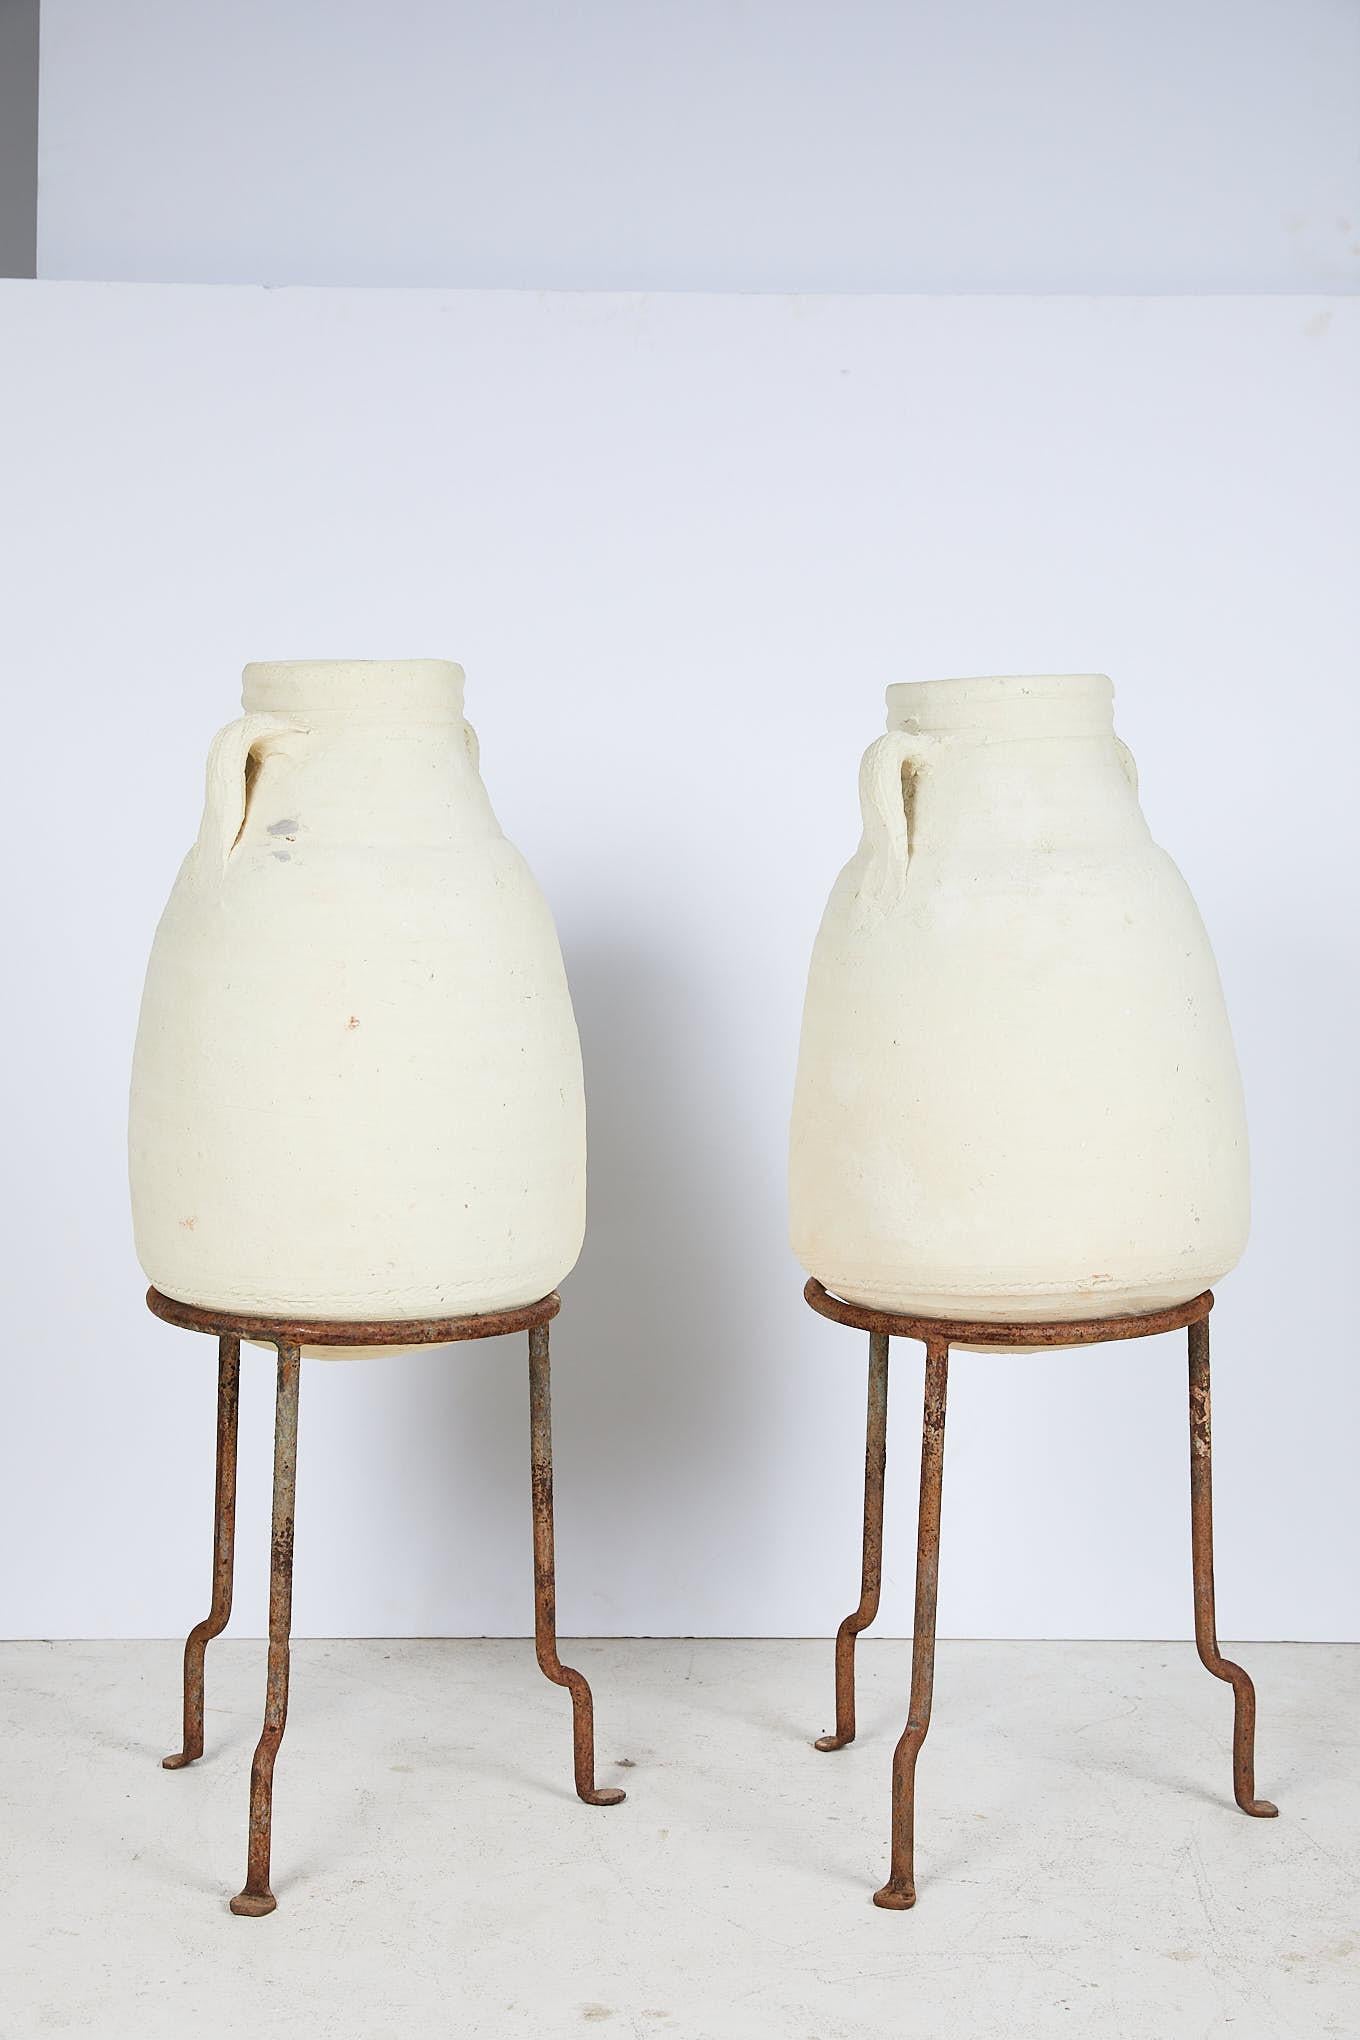 20th Century Pair of Vintage Mediterranean White Clay Vessels on Forged Iron Stands